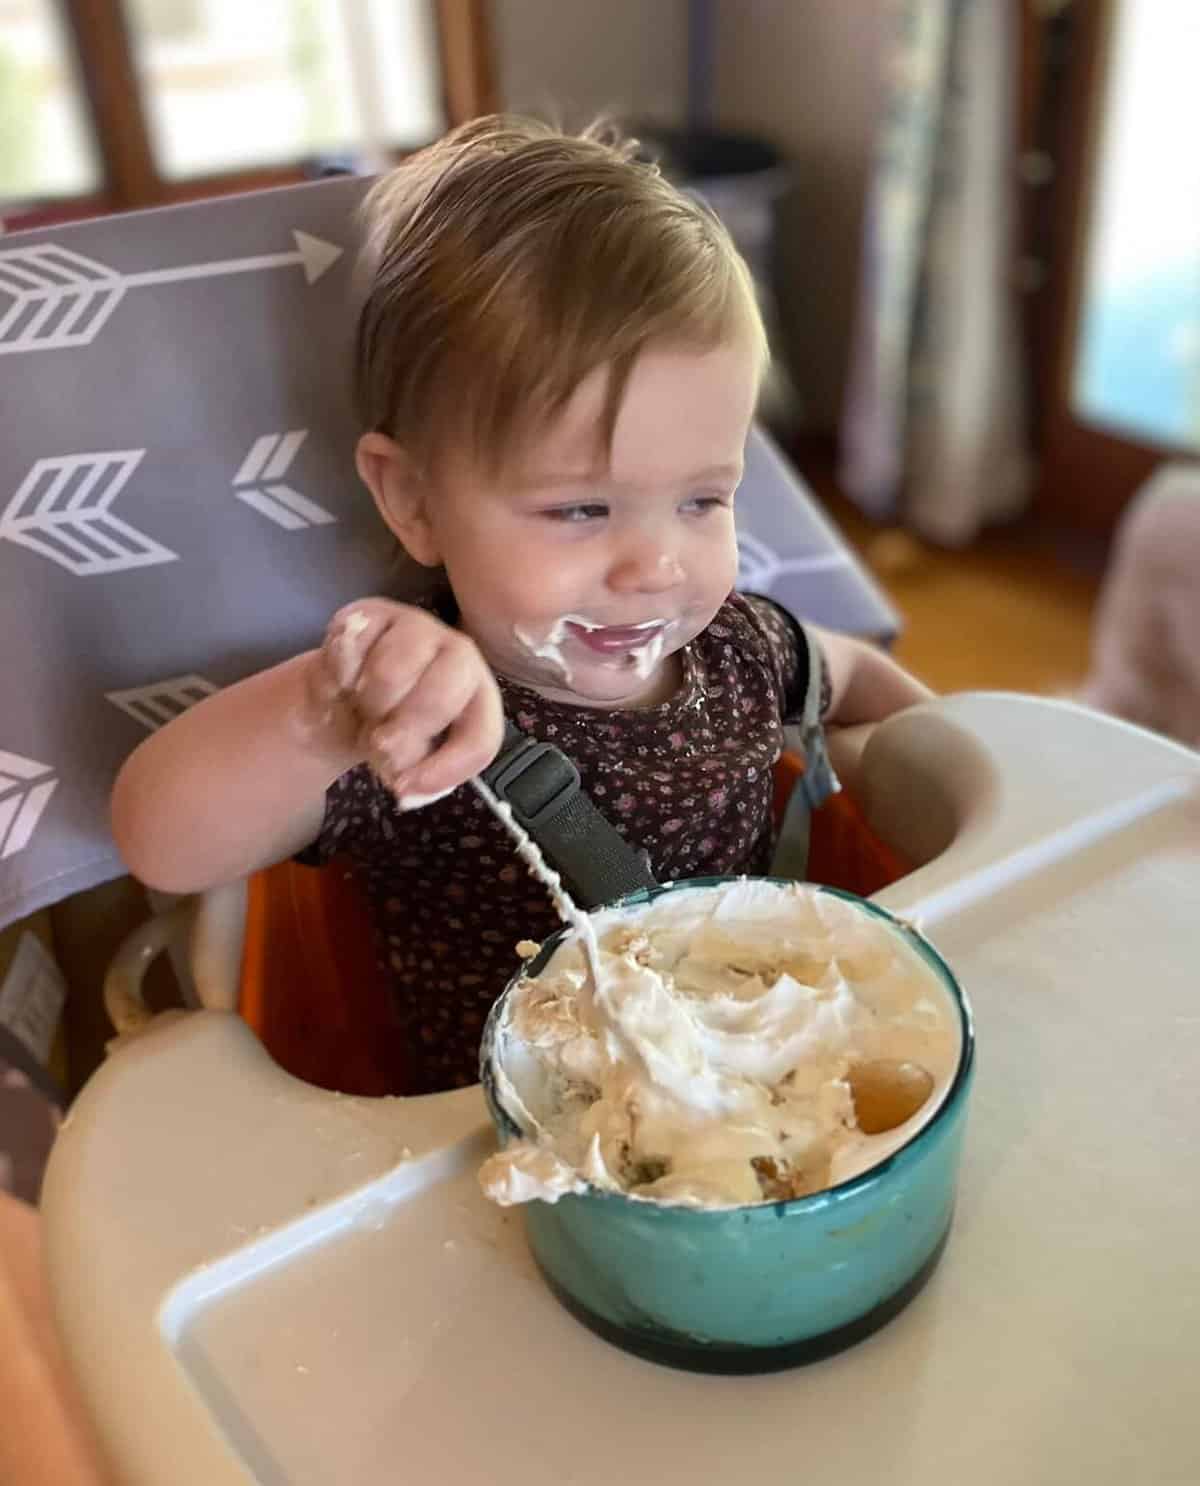 daughters first birthday dessert, eating banana pudding in her high chair.